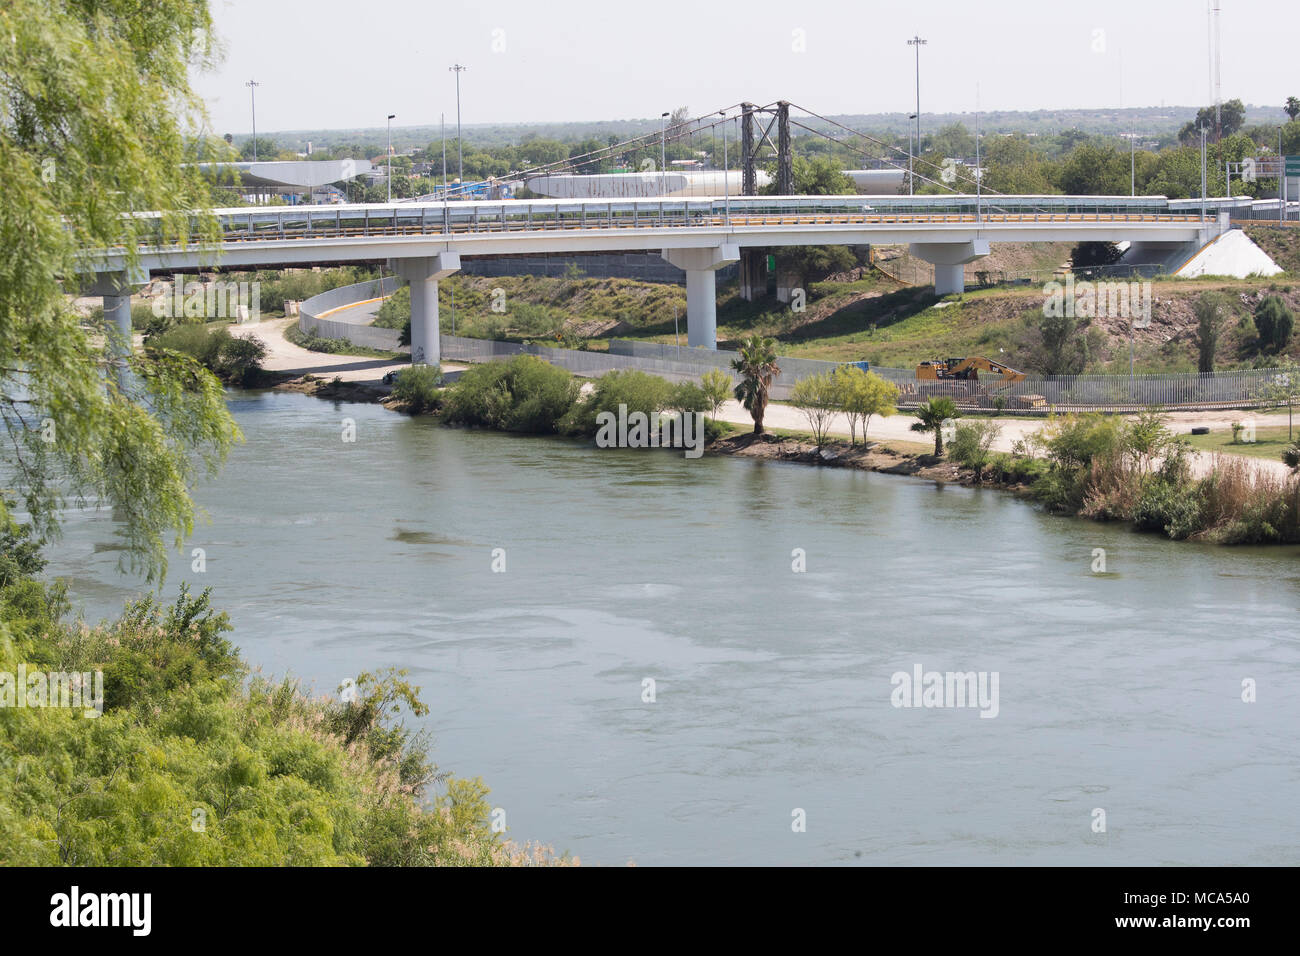 The Rio Grande River flows southward between the bluffs of Roma, TX., and the Mexican city of Ciudad Miguel Aleman to the right. Stock Photo